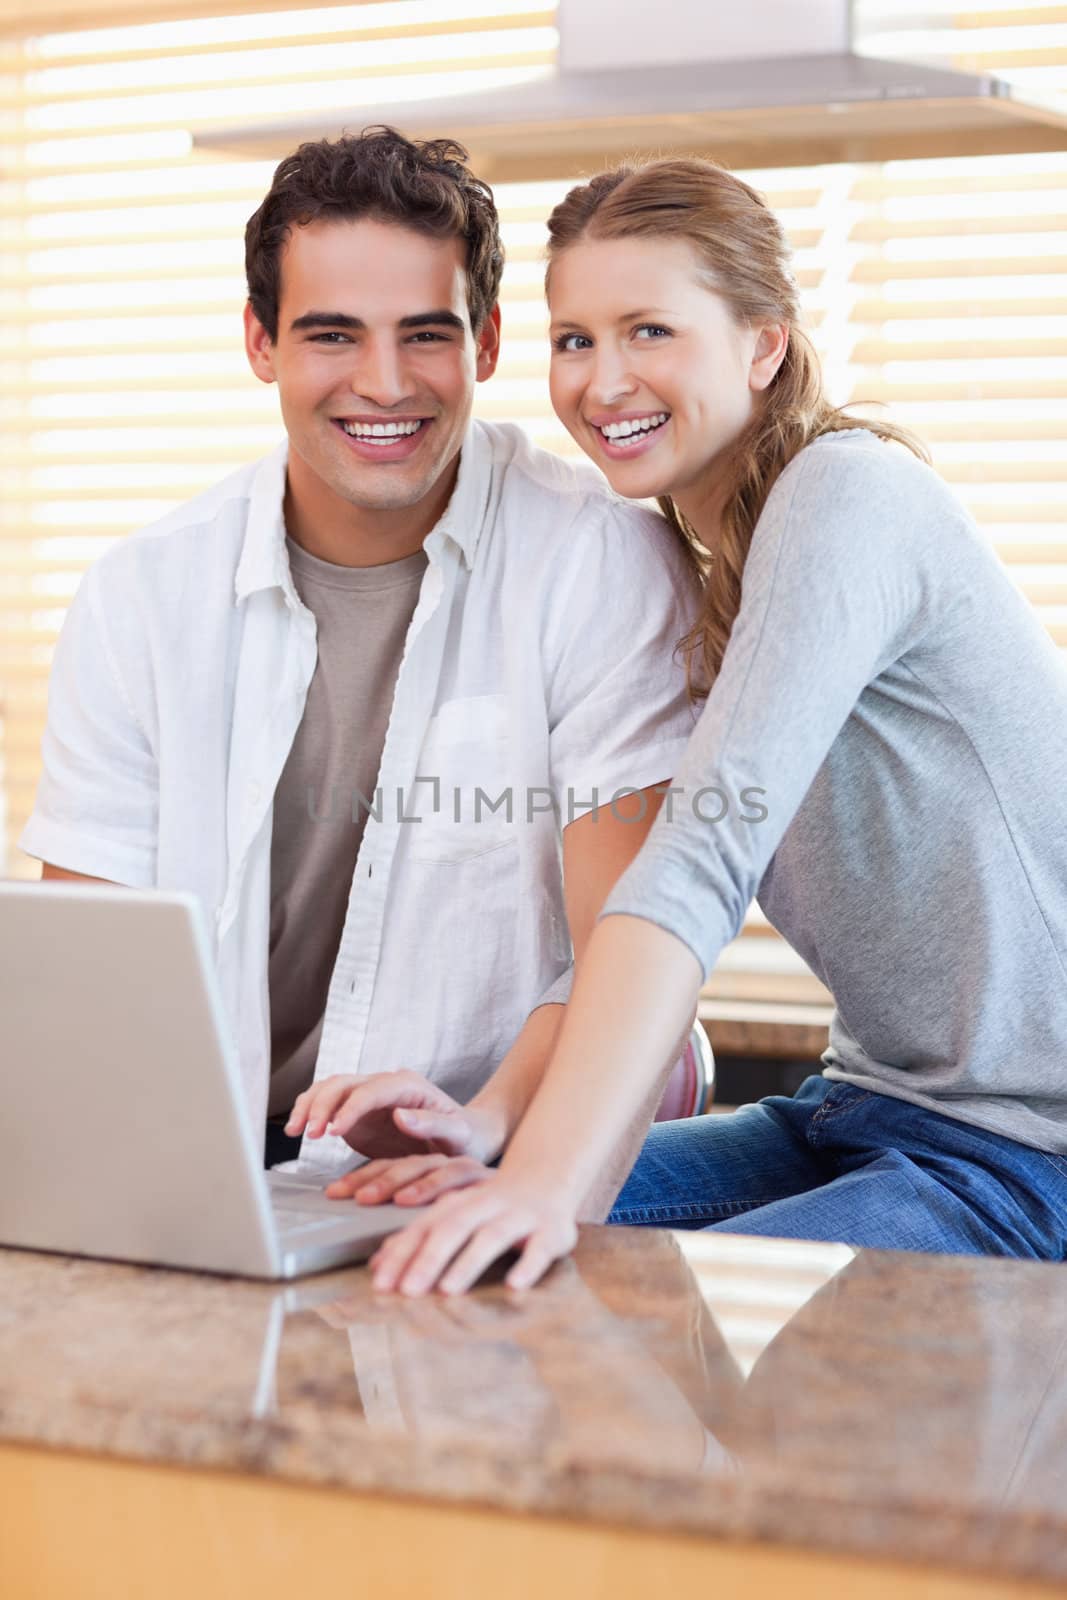 Smiling young couple with notebook in the kitchen